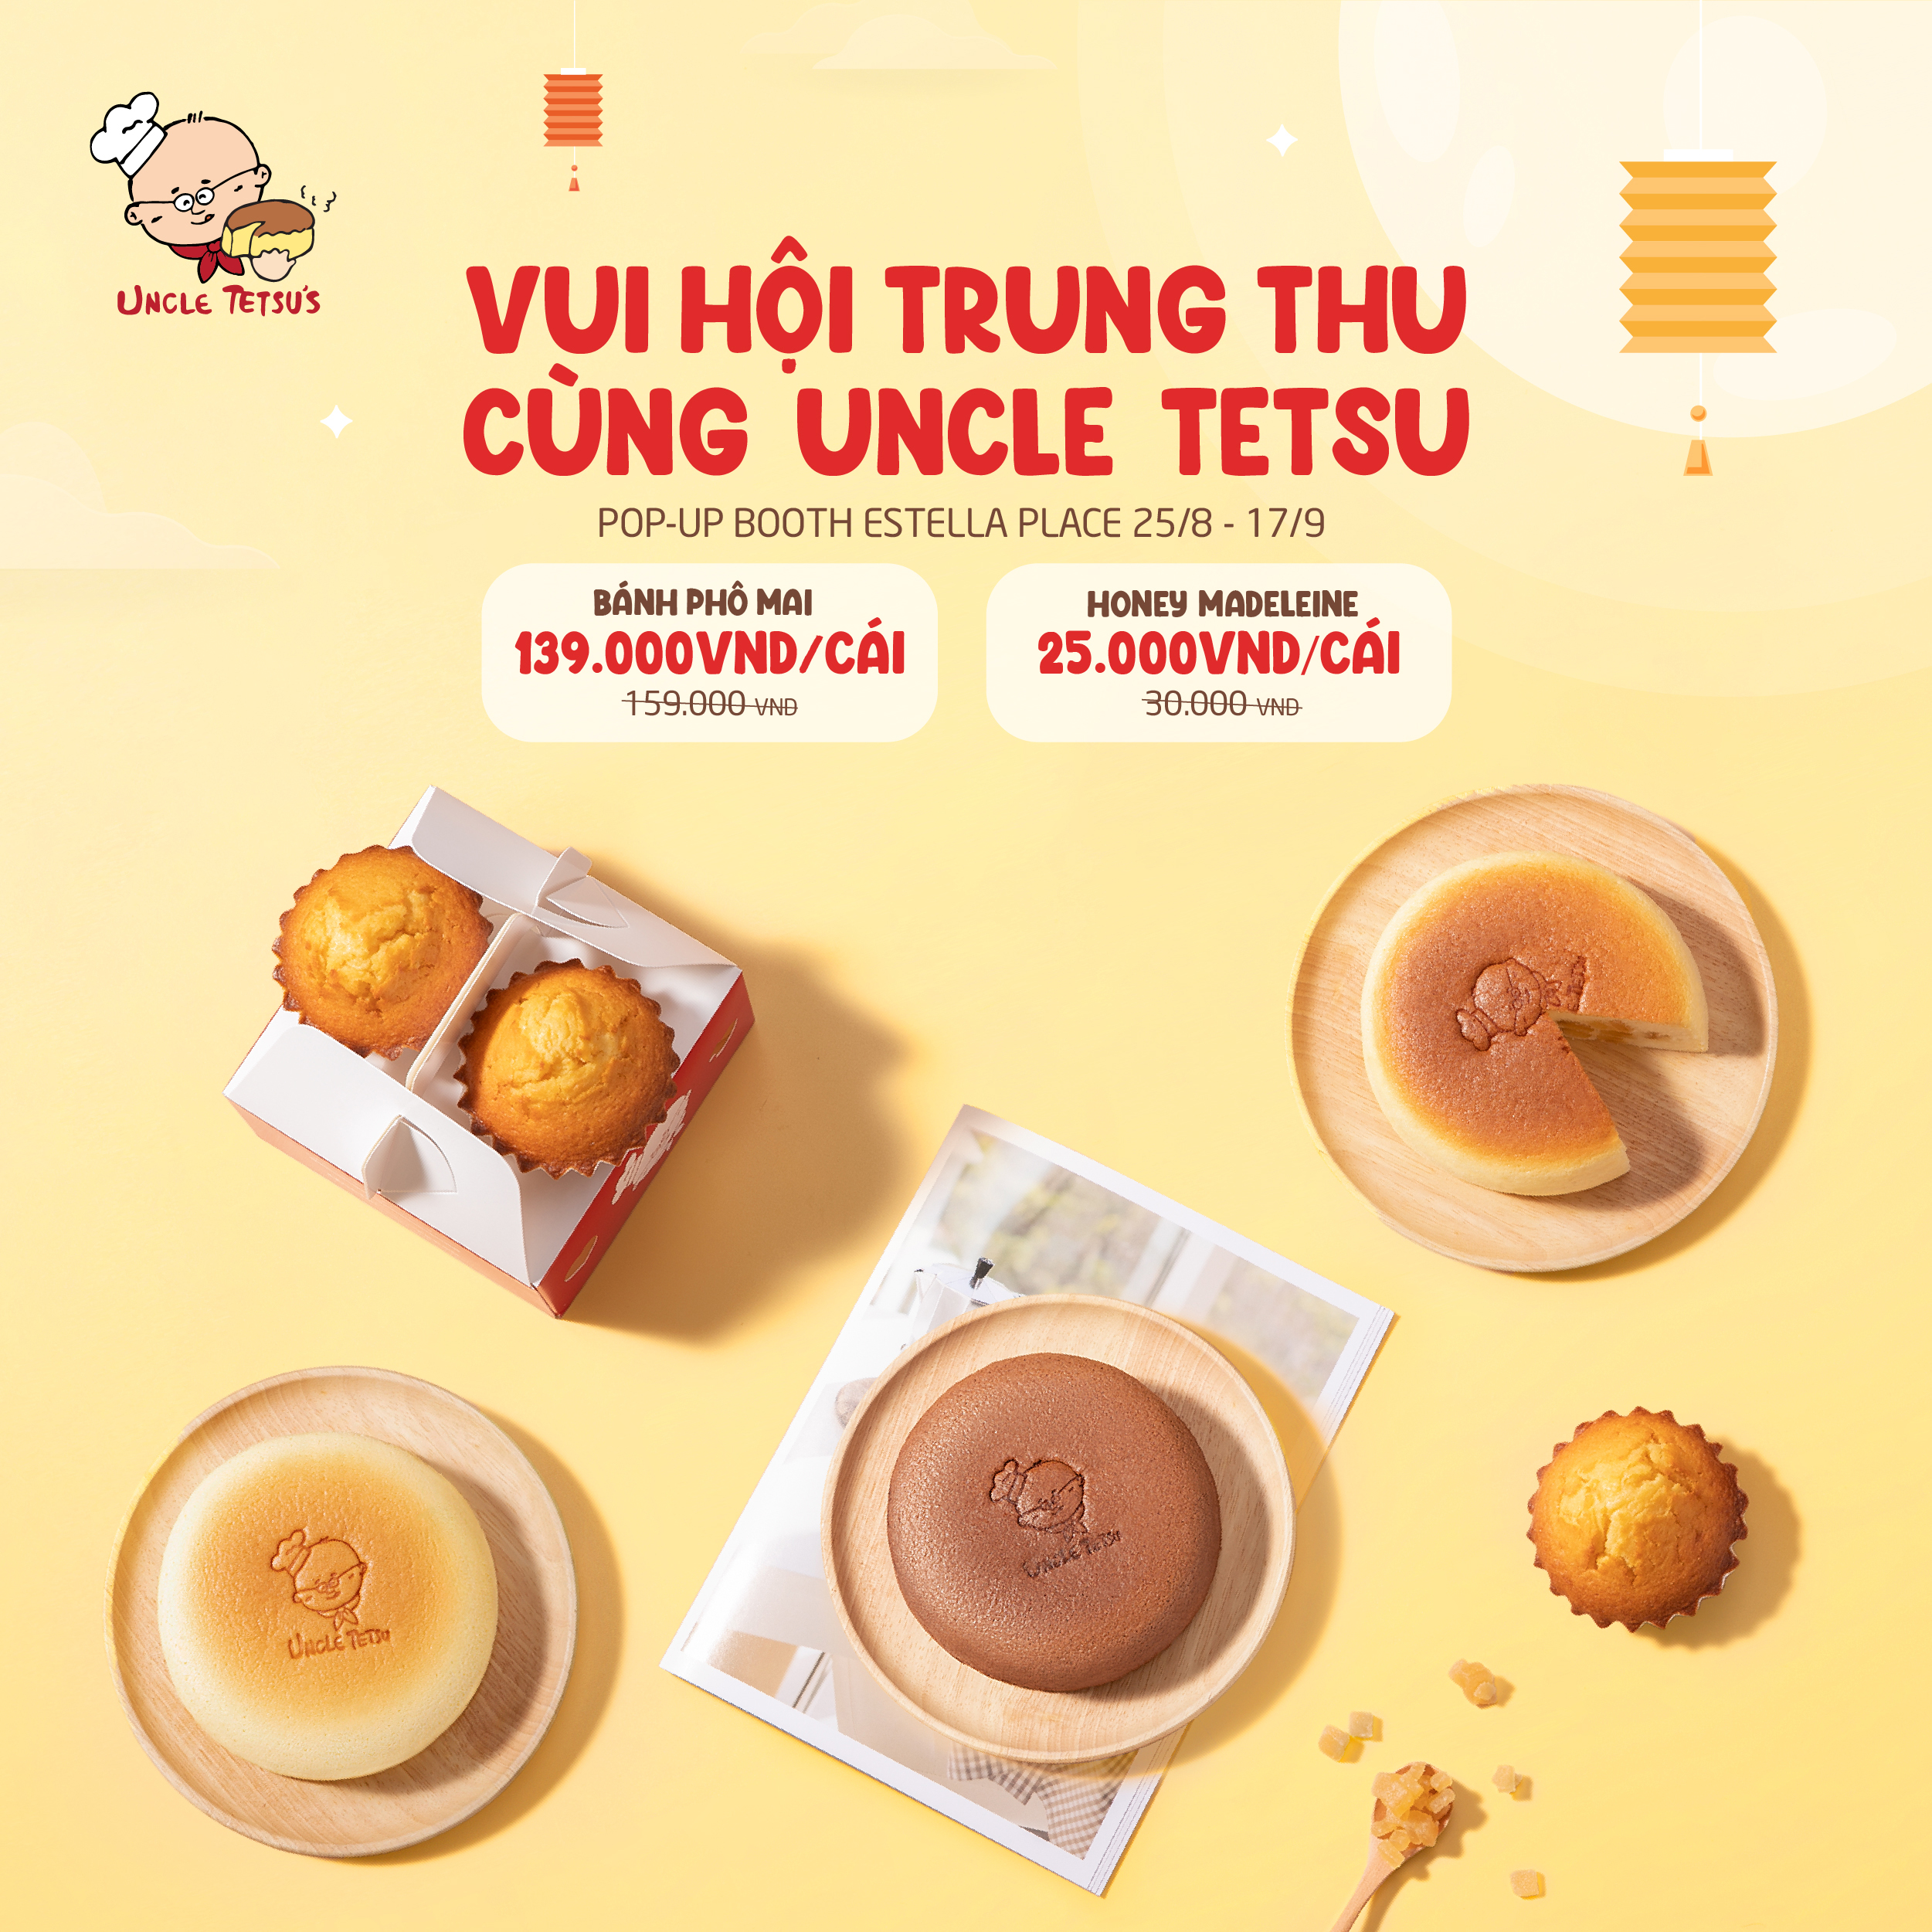 🌟ENJOY THE MID-AUTUMN FESTIVAL WITH UNCLE TETSU AT ESTELLA PLACE